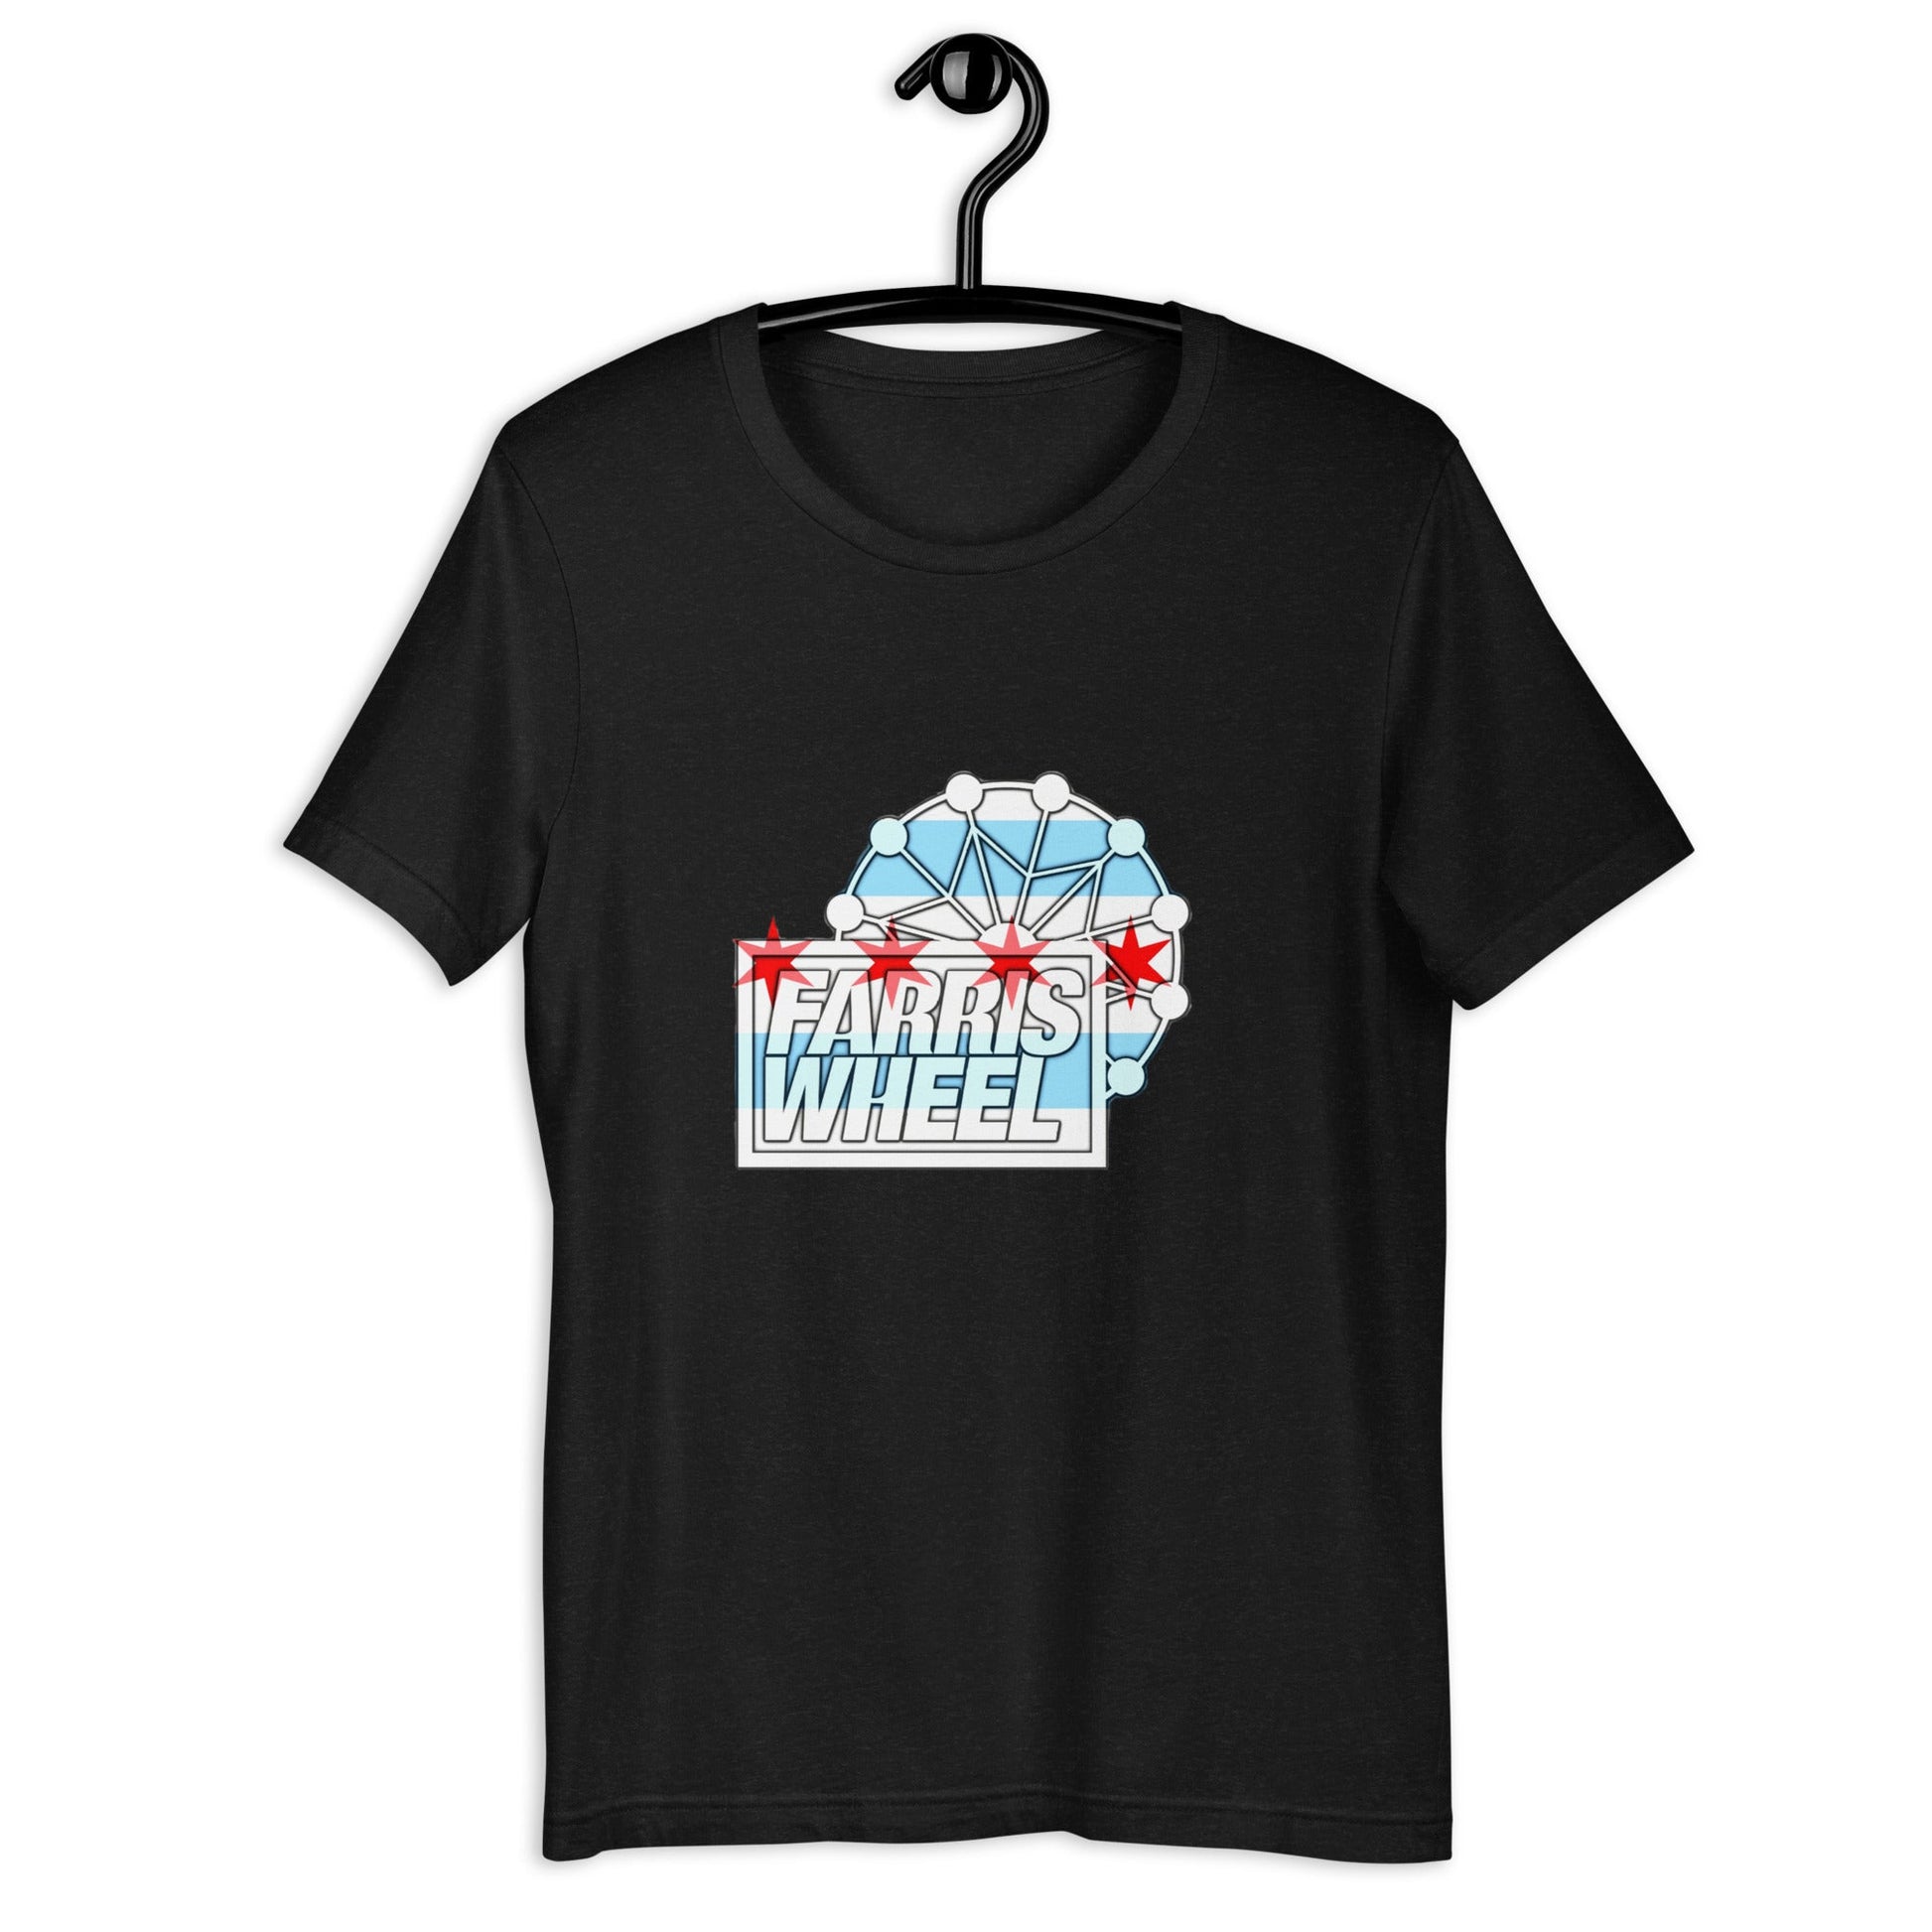 Farris Wheel Chicago Style Unisex T-shirt - BeExtra! Apparel & More